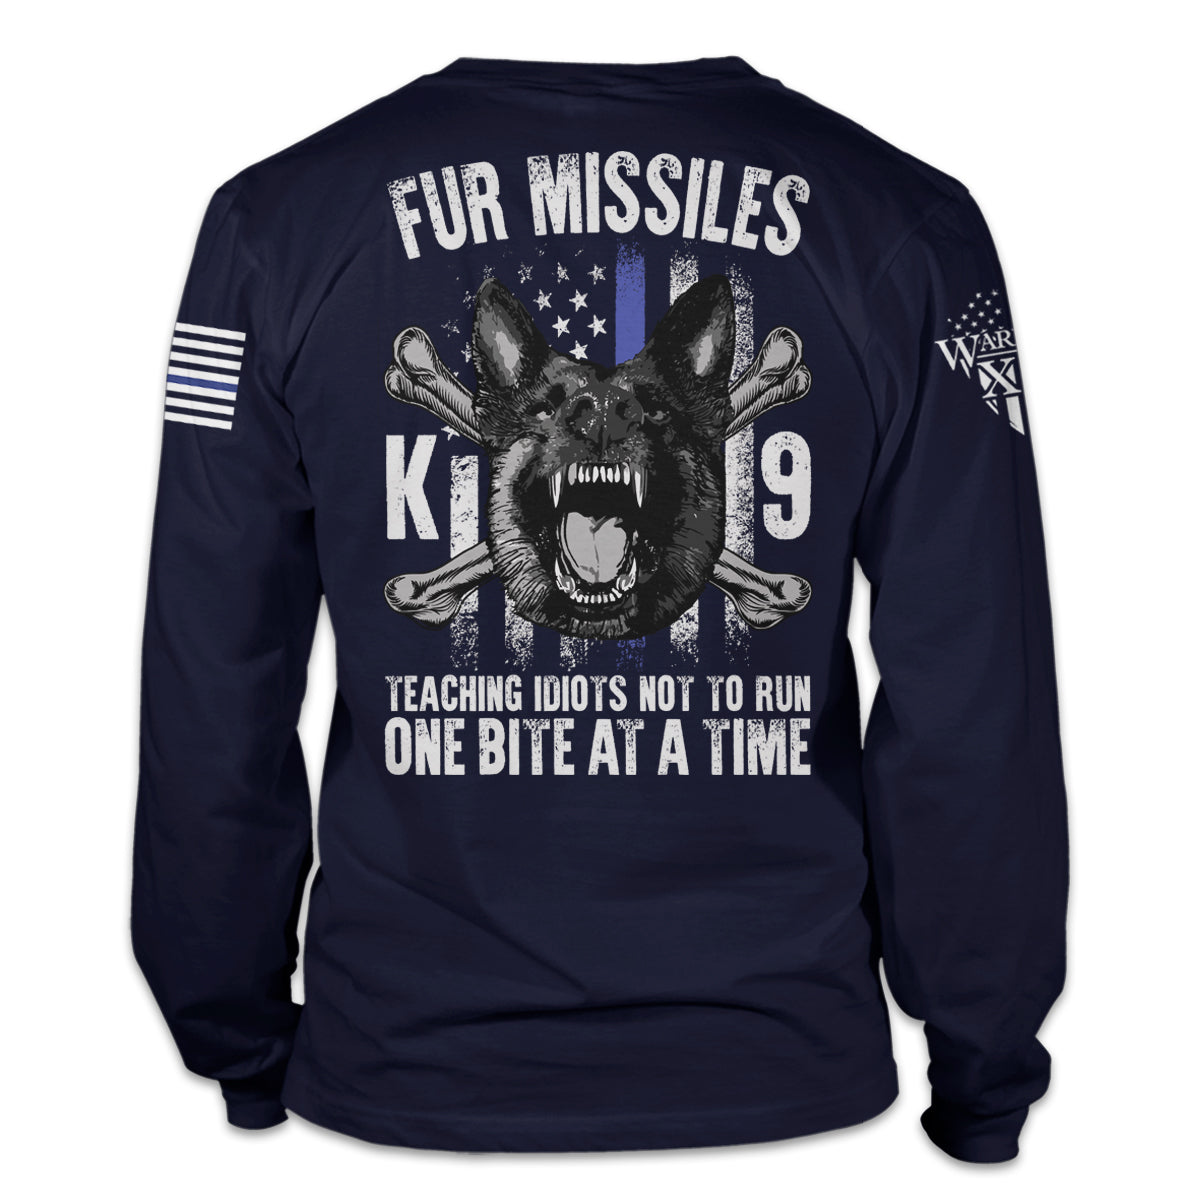 A navy blue long sleeve shirt with the words "Fur Missiles, Teaching Idiots Not To Run, One Bite At A Time!" featuring a german shepherd showing teeth in front of a thin blue line USA flag printed on the back of the shirt.